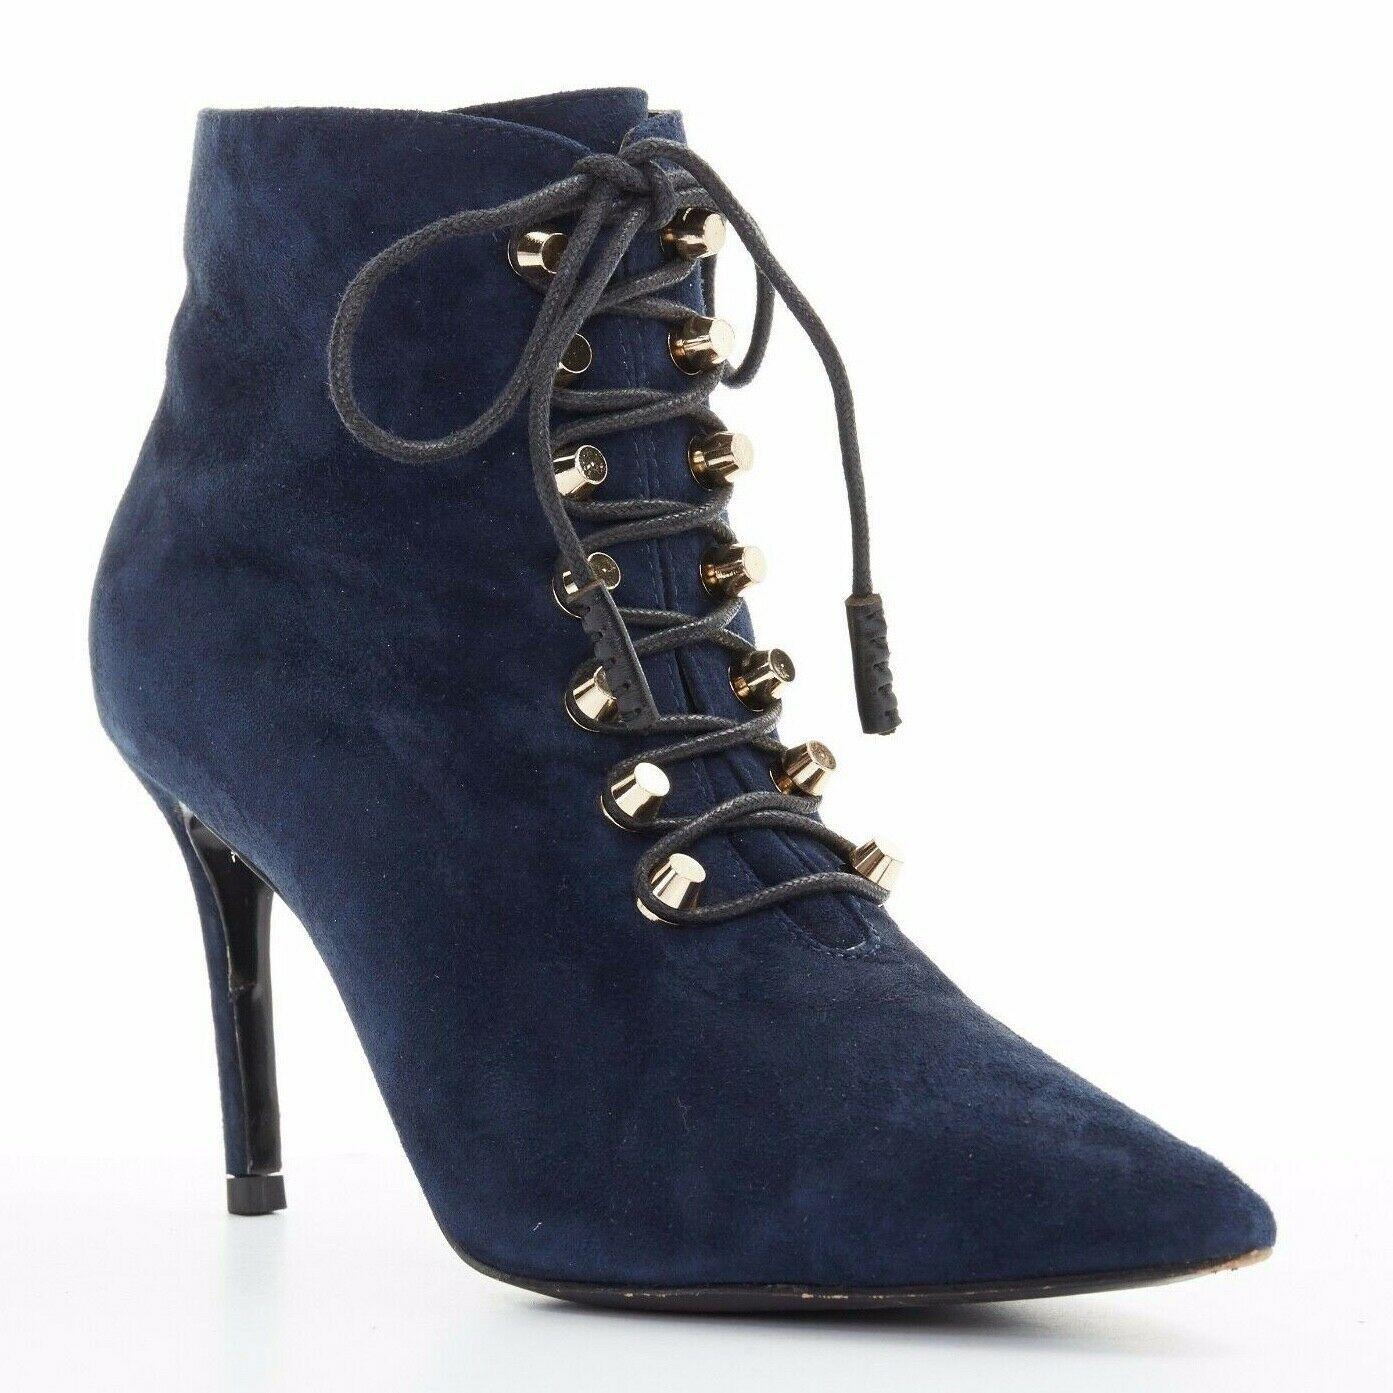 BALENCIAGA navy blue suede gold-tone stud lace up point toe ankle bootie EU37
Designer: Balenciaga
Material: Leather
Extra Details: Navy suede leather upper. Copper-tone hardware. Waxed leaces. Lace up front closure. Pointed toe. Slim heel. Zip on